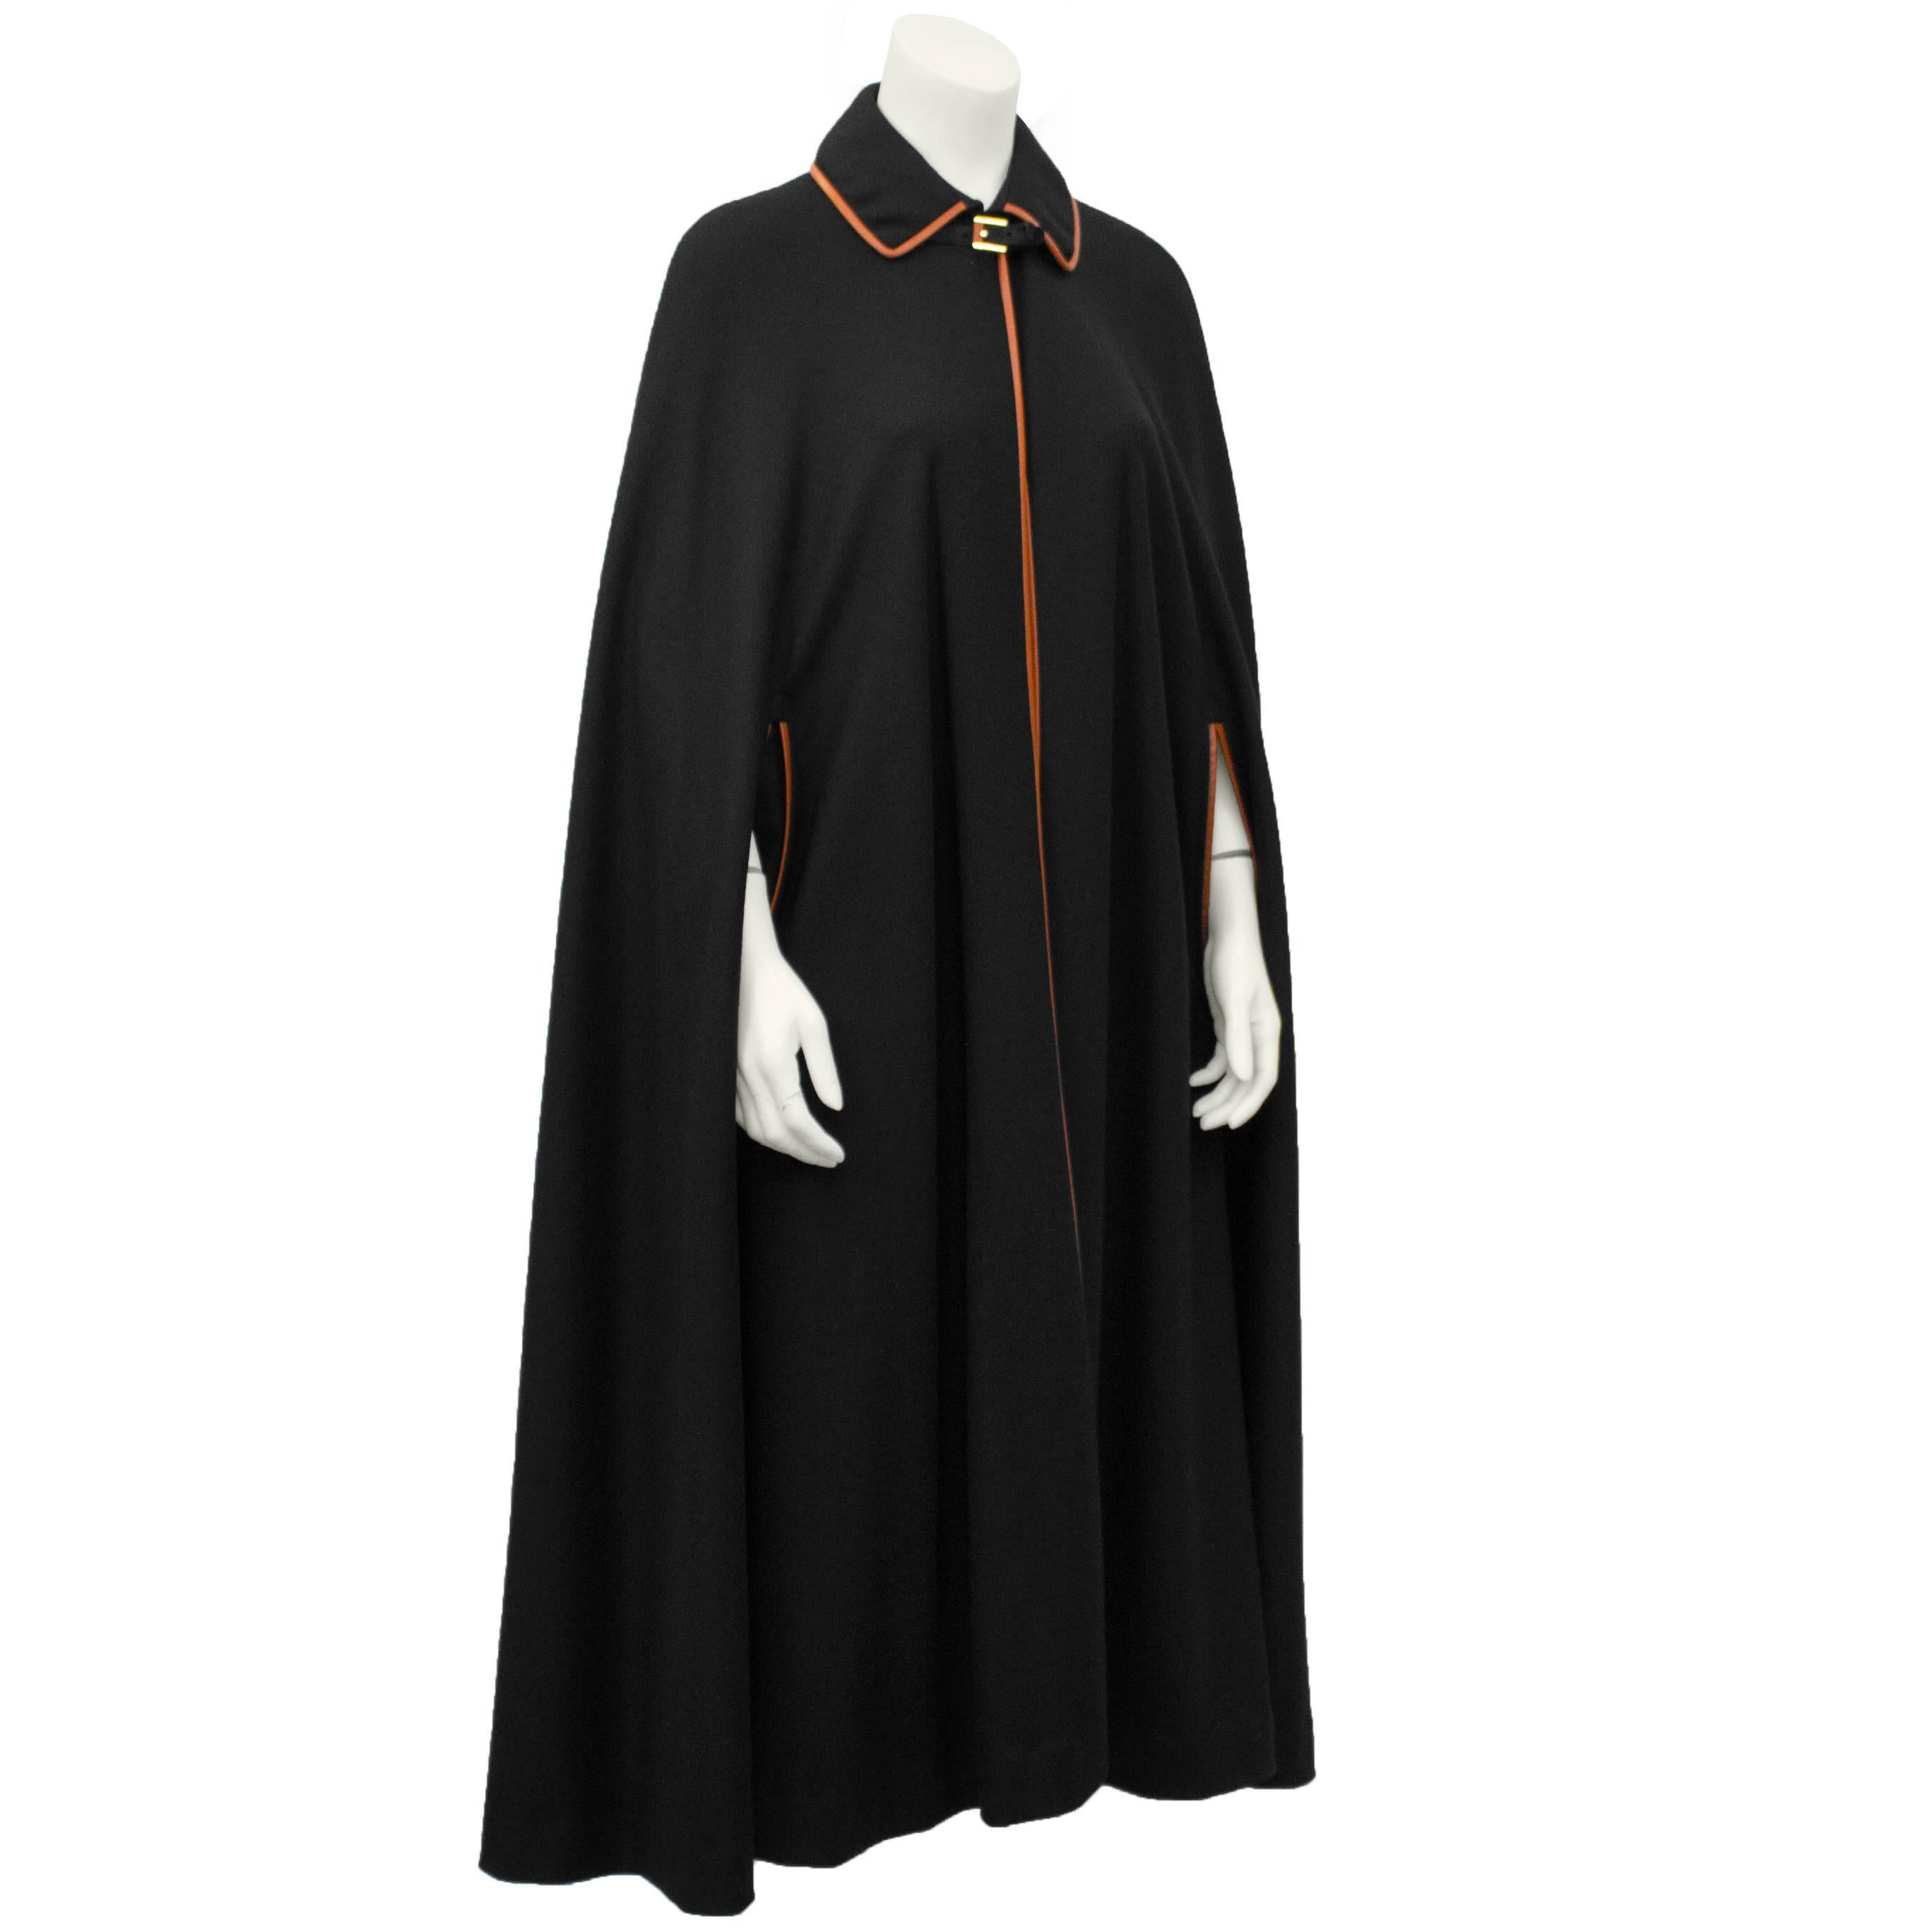 1970's anonymous black wool cape and skirt ensemble. Cape features a buckle closure at neck and contrasting chestnut leather piping throughout. Skirt has a natural high waist and straight cut, featuring corresponding chestnut leather trim. Two front